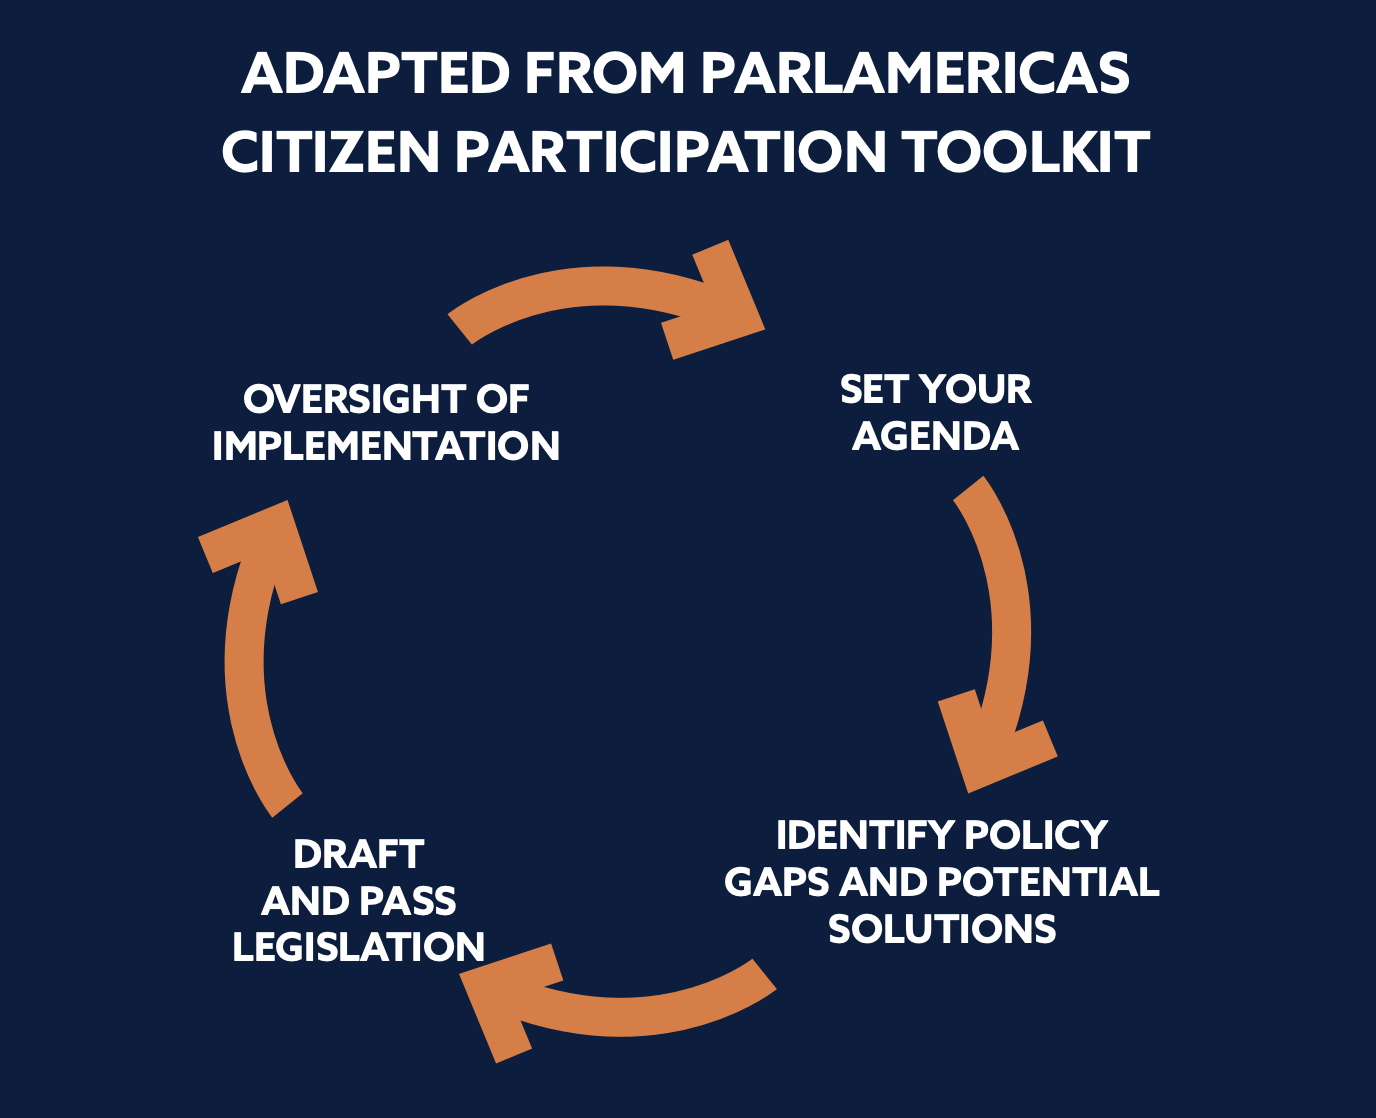 Adapted from Parlamericas Citizen Participation Toolkit: A cycle of: Set Your Agenda, Identify Policy Gaps and Potential Solutions, Draft and Pass Legislation, Oversight of Implementation